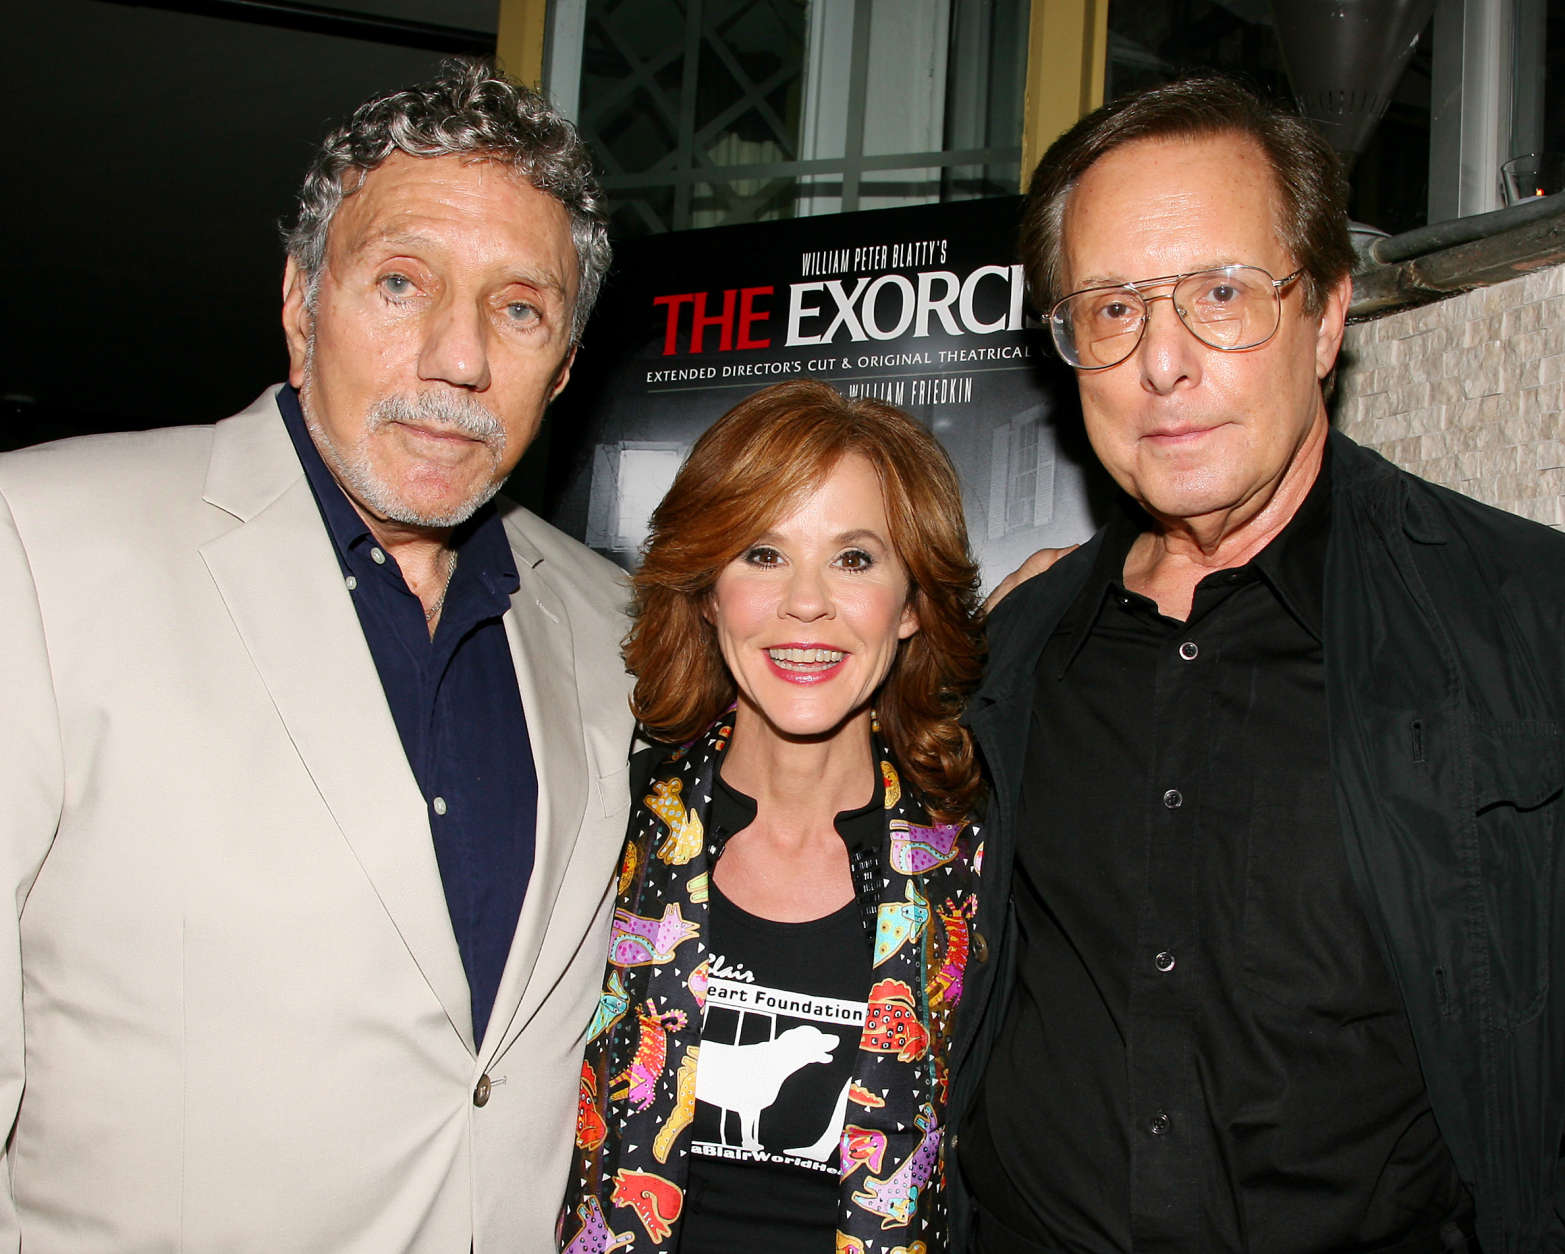 In this photo released by Starpix, "The Exorcist" author William Peter Blatty, left, joins Linda Blair, who starred in the 1973 film and William Friedkin, the film's director, at a screening of the remastered film, Wednesday, Sept. 29, 2010 held at the Museum of Modern Art in New York. (AP Photo/Starpix, Dave Allocca)